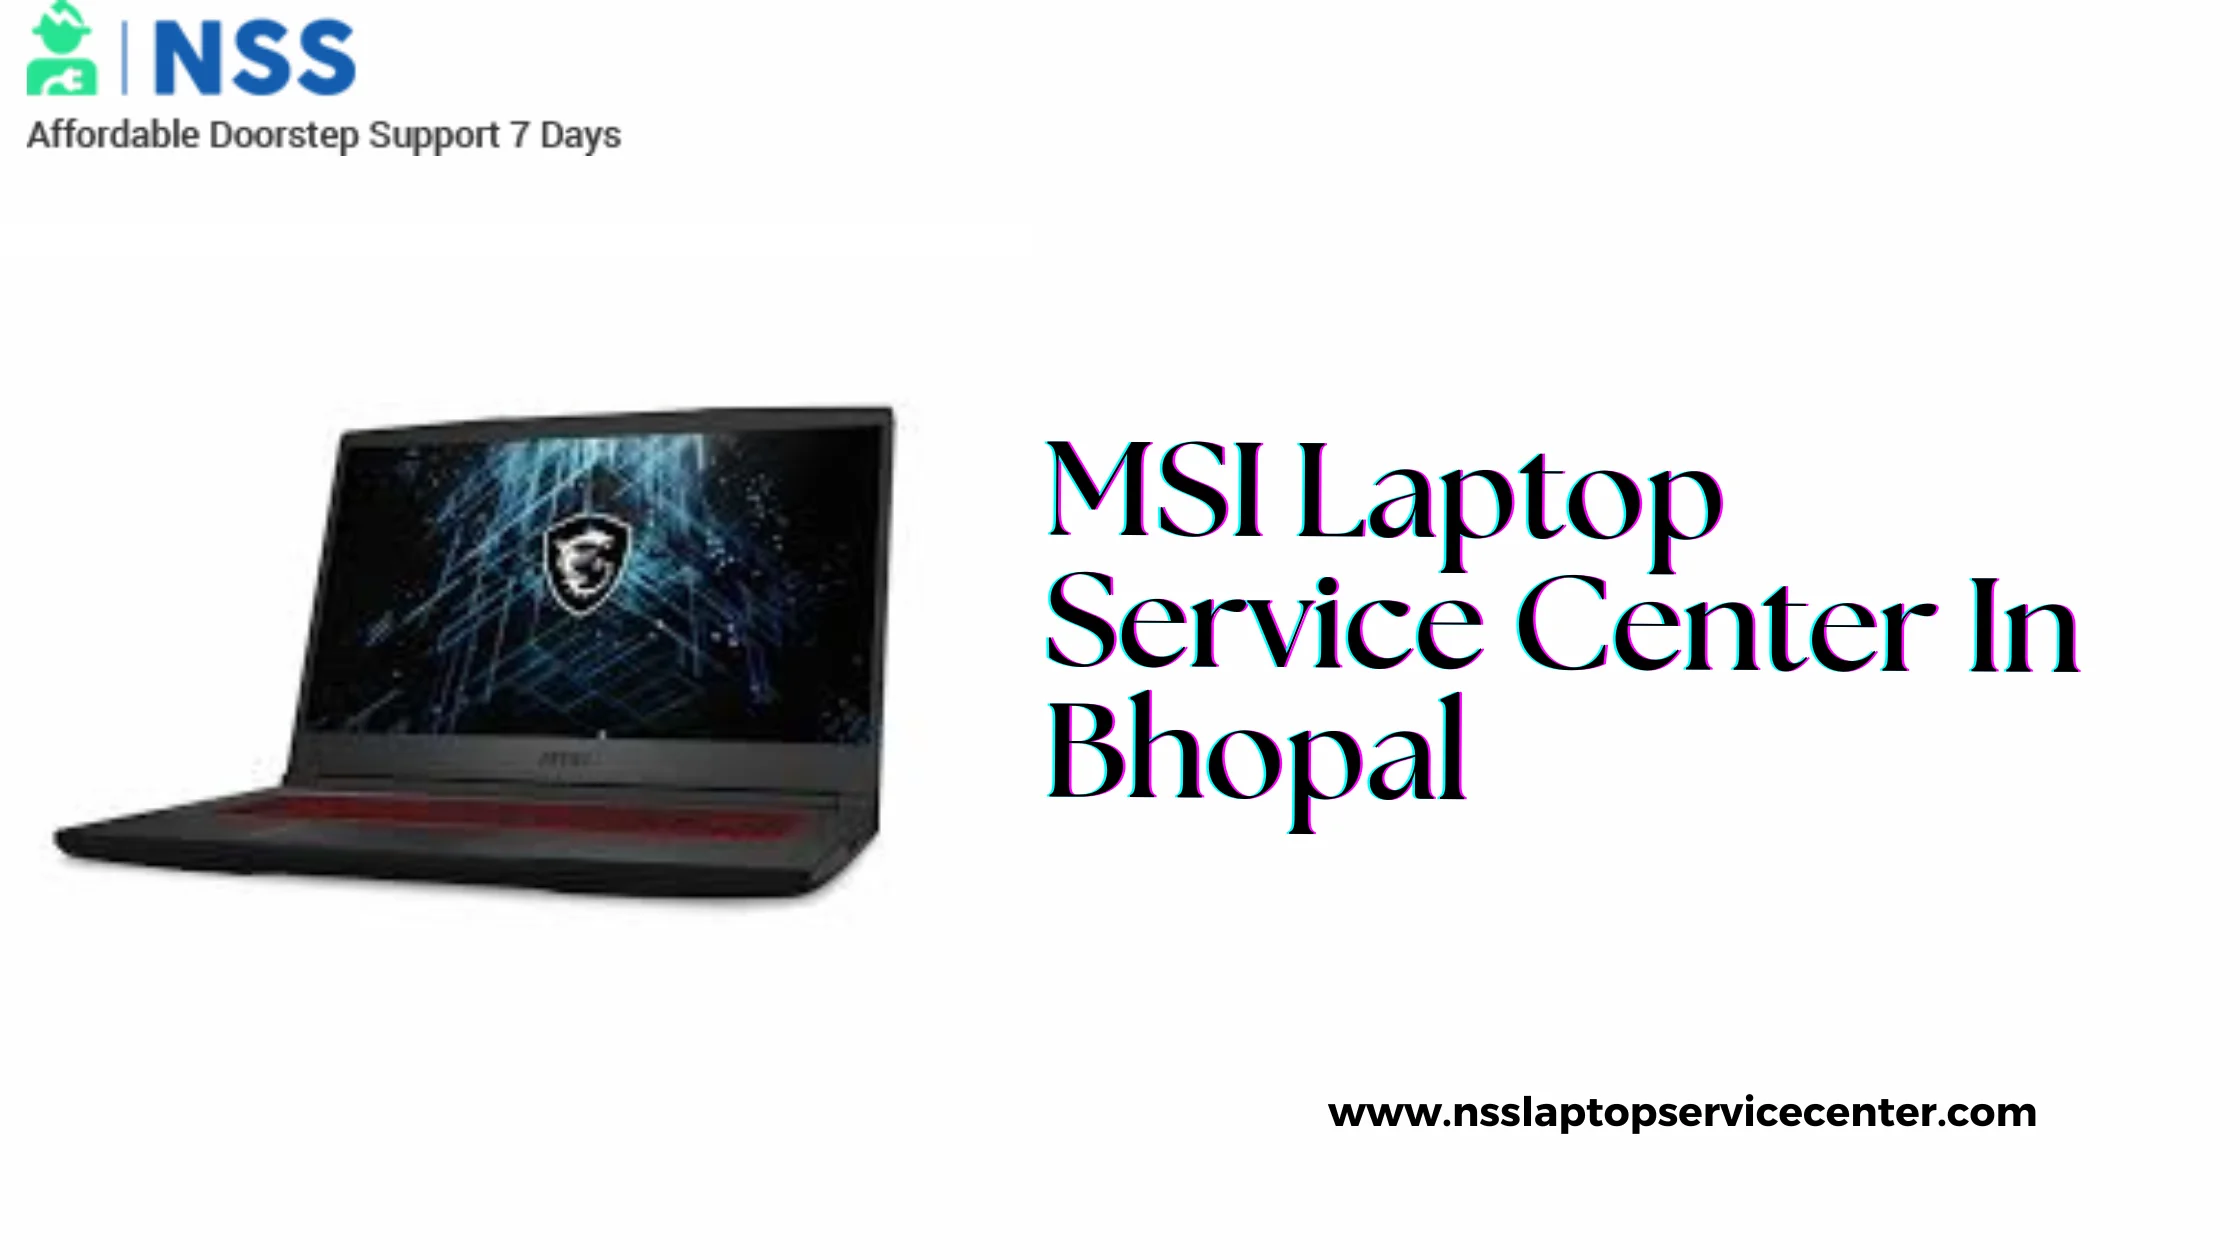 MSI Laptop Service Center in Bhopal